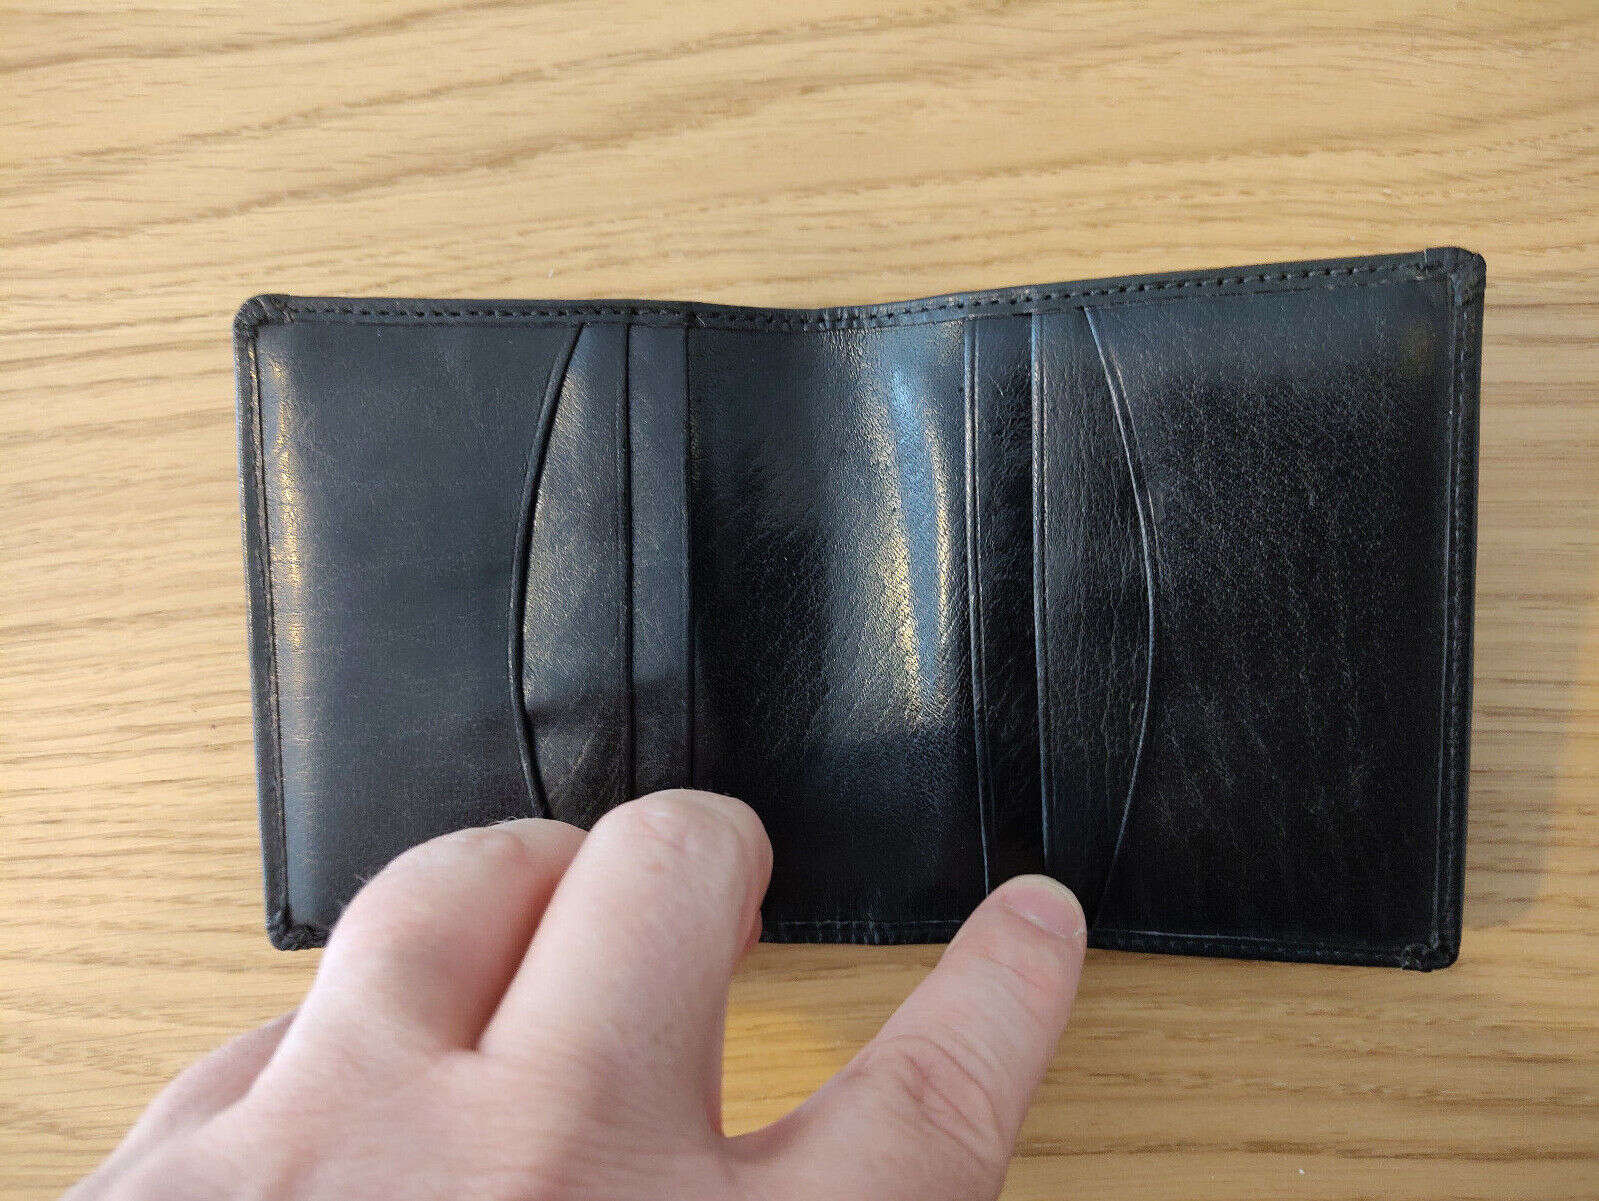 Sho-Gun Wallet by Jerry O’Connel & Propdog held open by hand on wooden surface